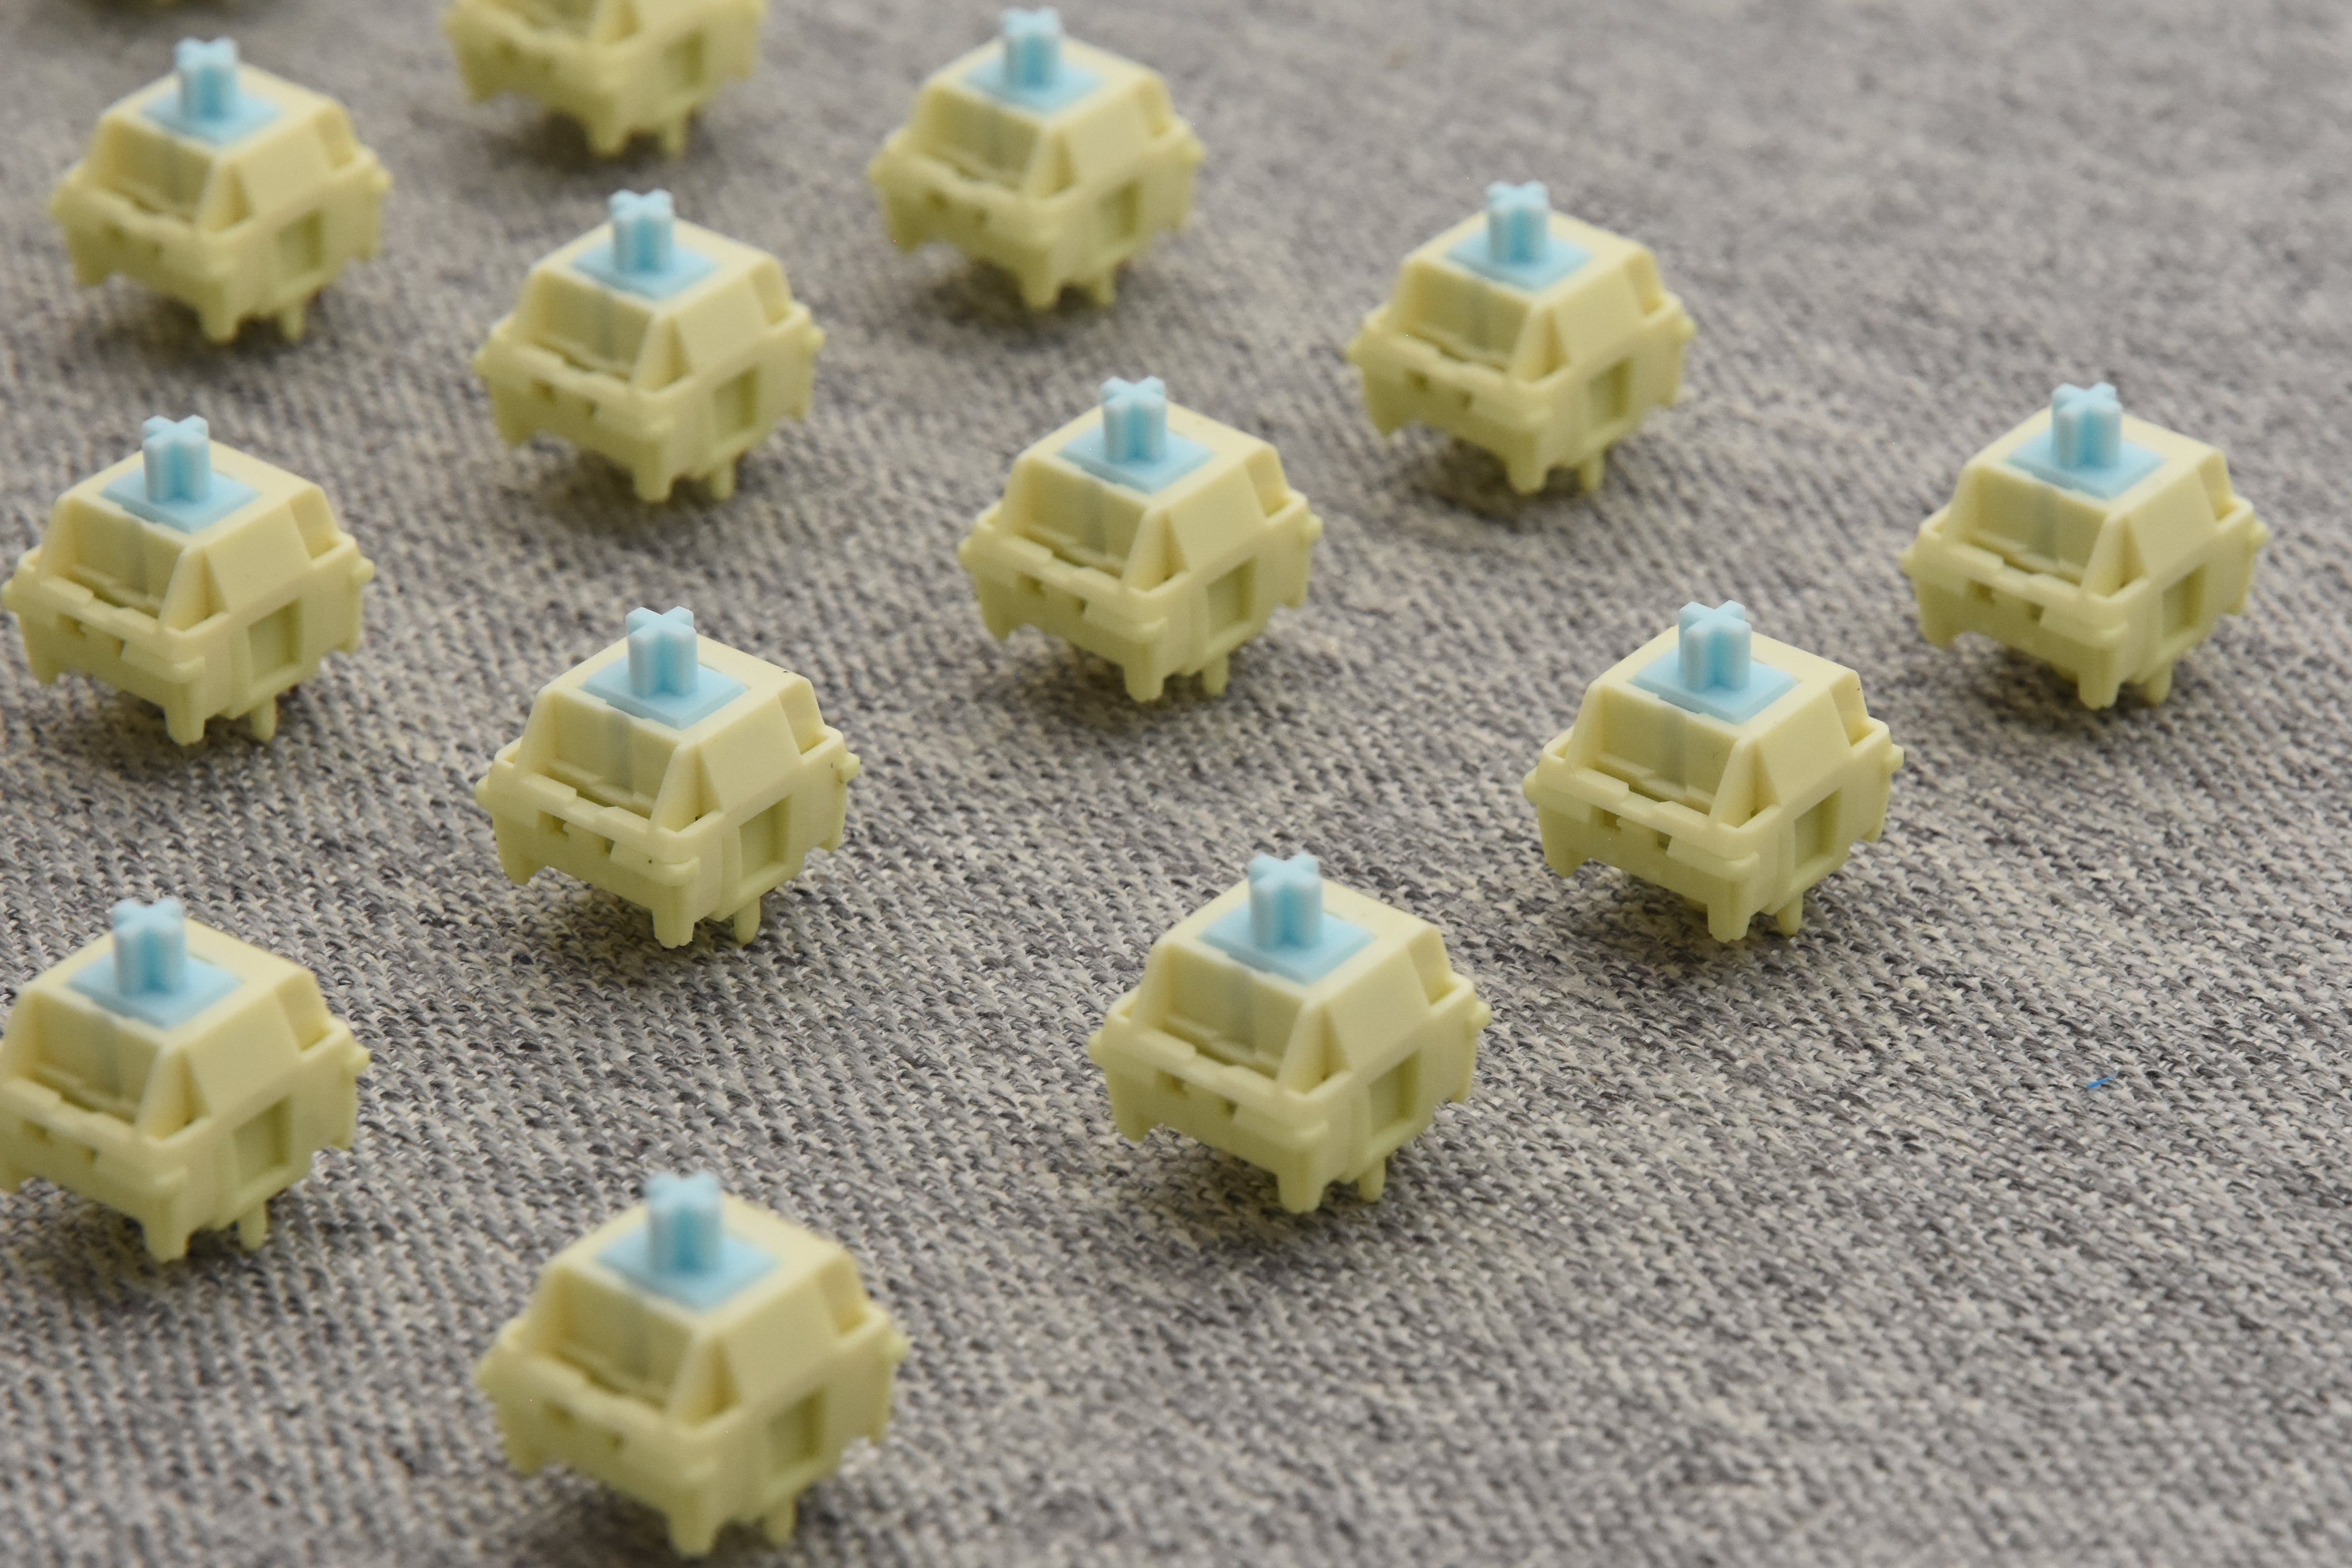 HMX GACHAPON LINEAR SWITCH FACTORY LUBED EDITION (10PCS)